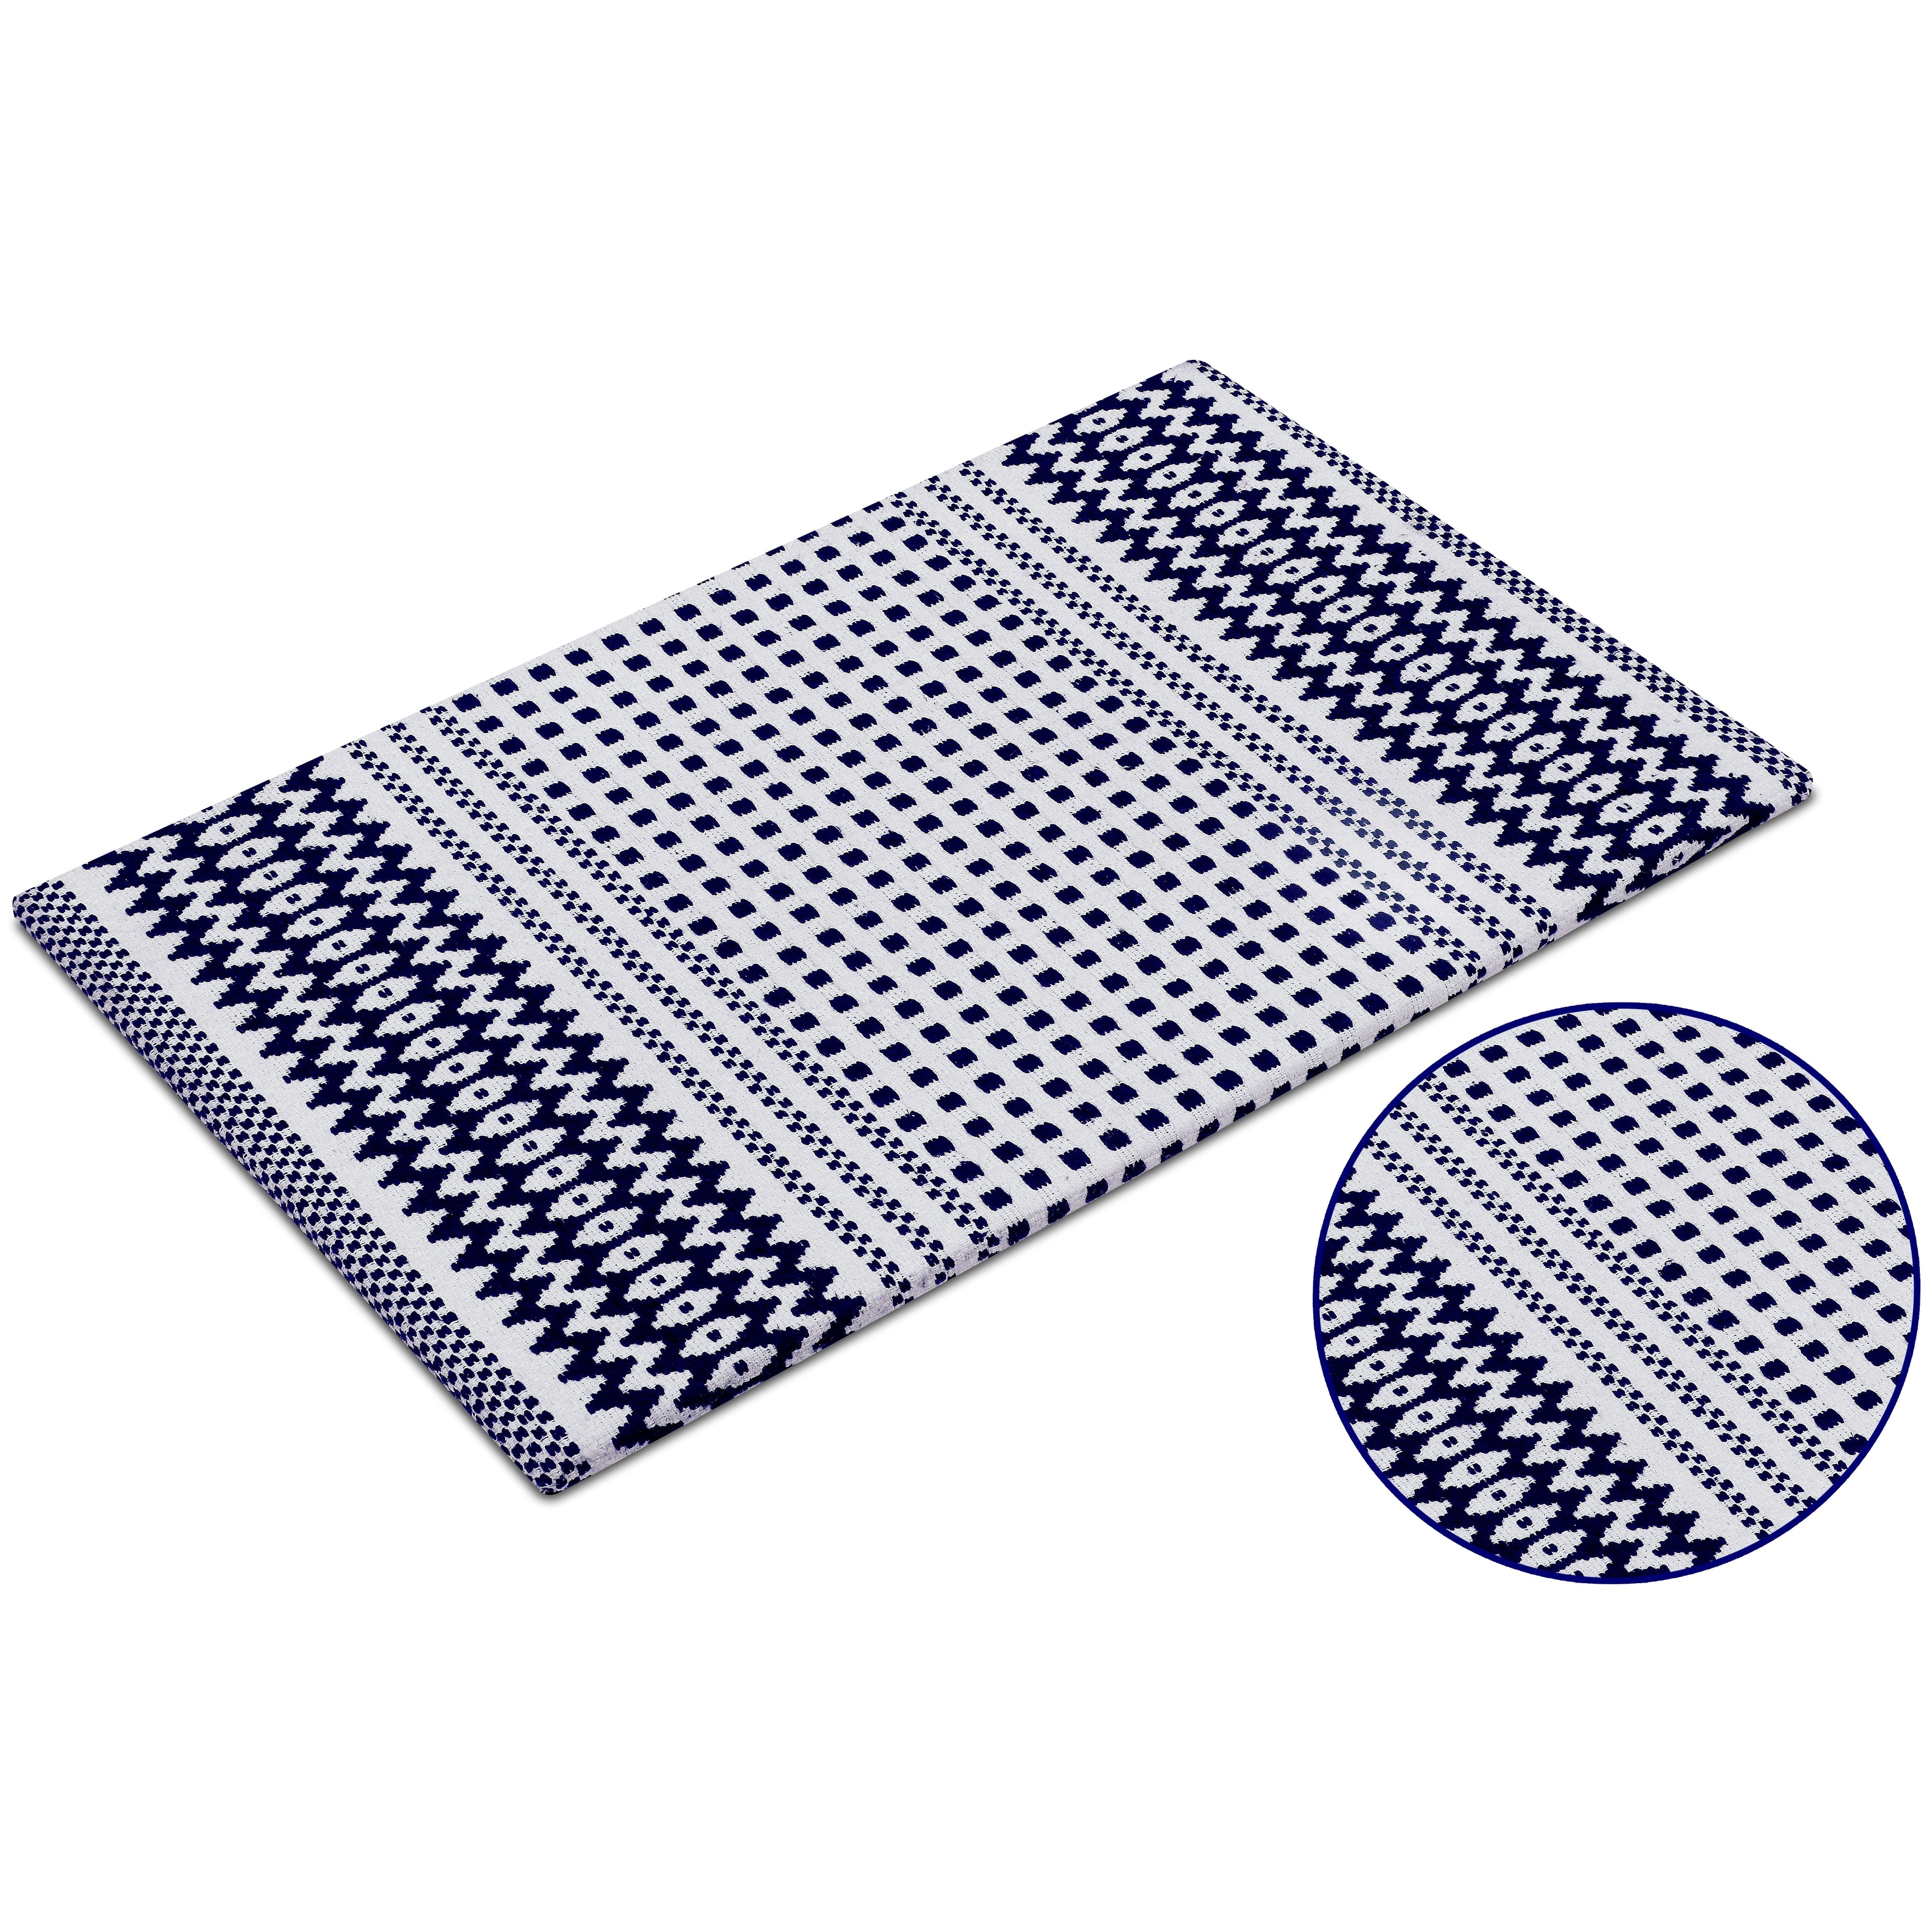 https://ak1.ostkcdn.com/images/products/is/images/direct/5731db23d3225779420068a3c476ce196d4fdf3e/Woven-Cotton-Anti-Fatigue-Cushioned-Kitchen-%7C-Doormat-%7C-Bathroom-18%22-x-30%22-Mats-With-Foam-Backing-Anti-Slip.jpg